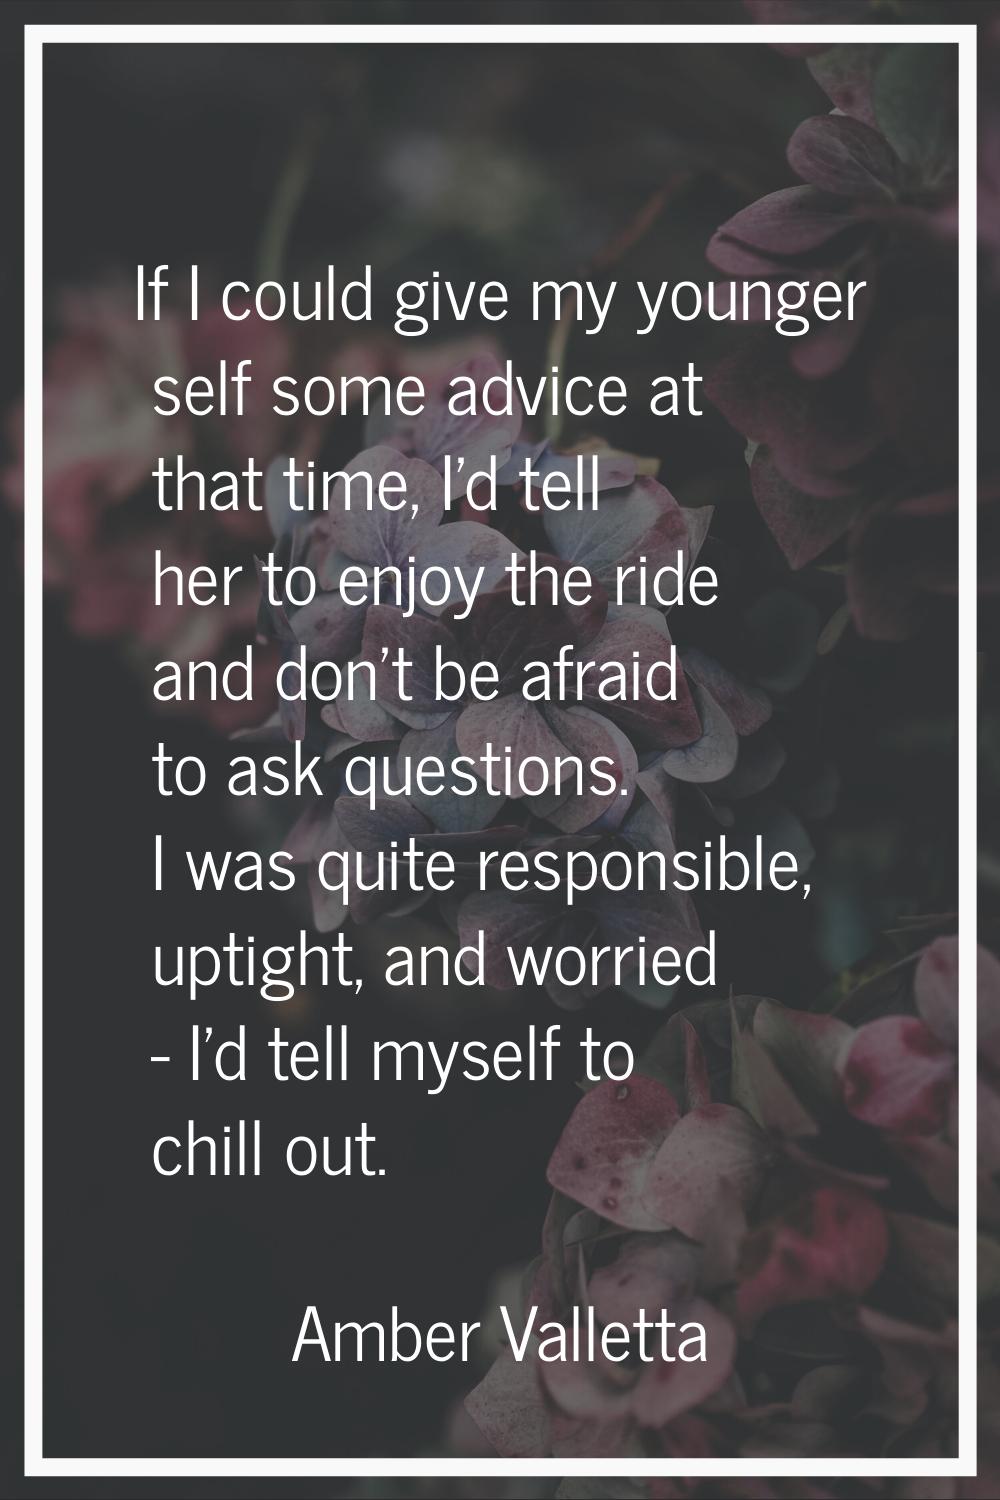 If I could give my younger self some advice at that time, I'd tell her to enjoy the ride and don't 